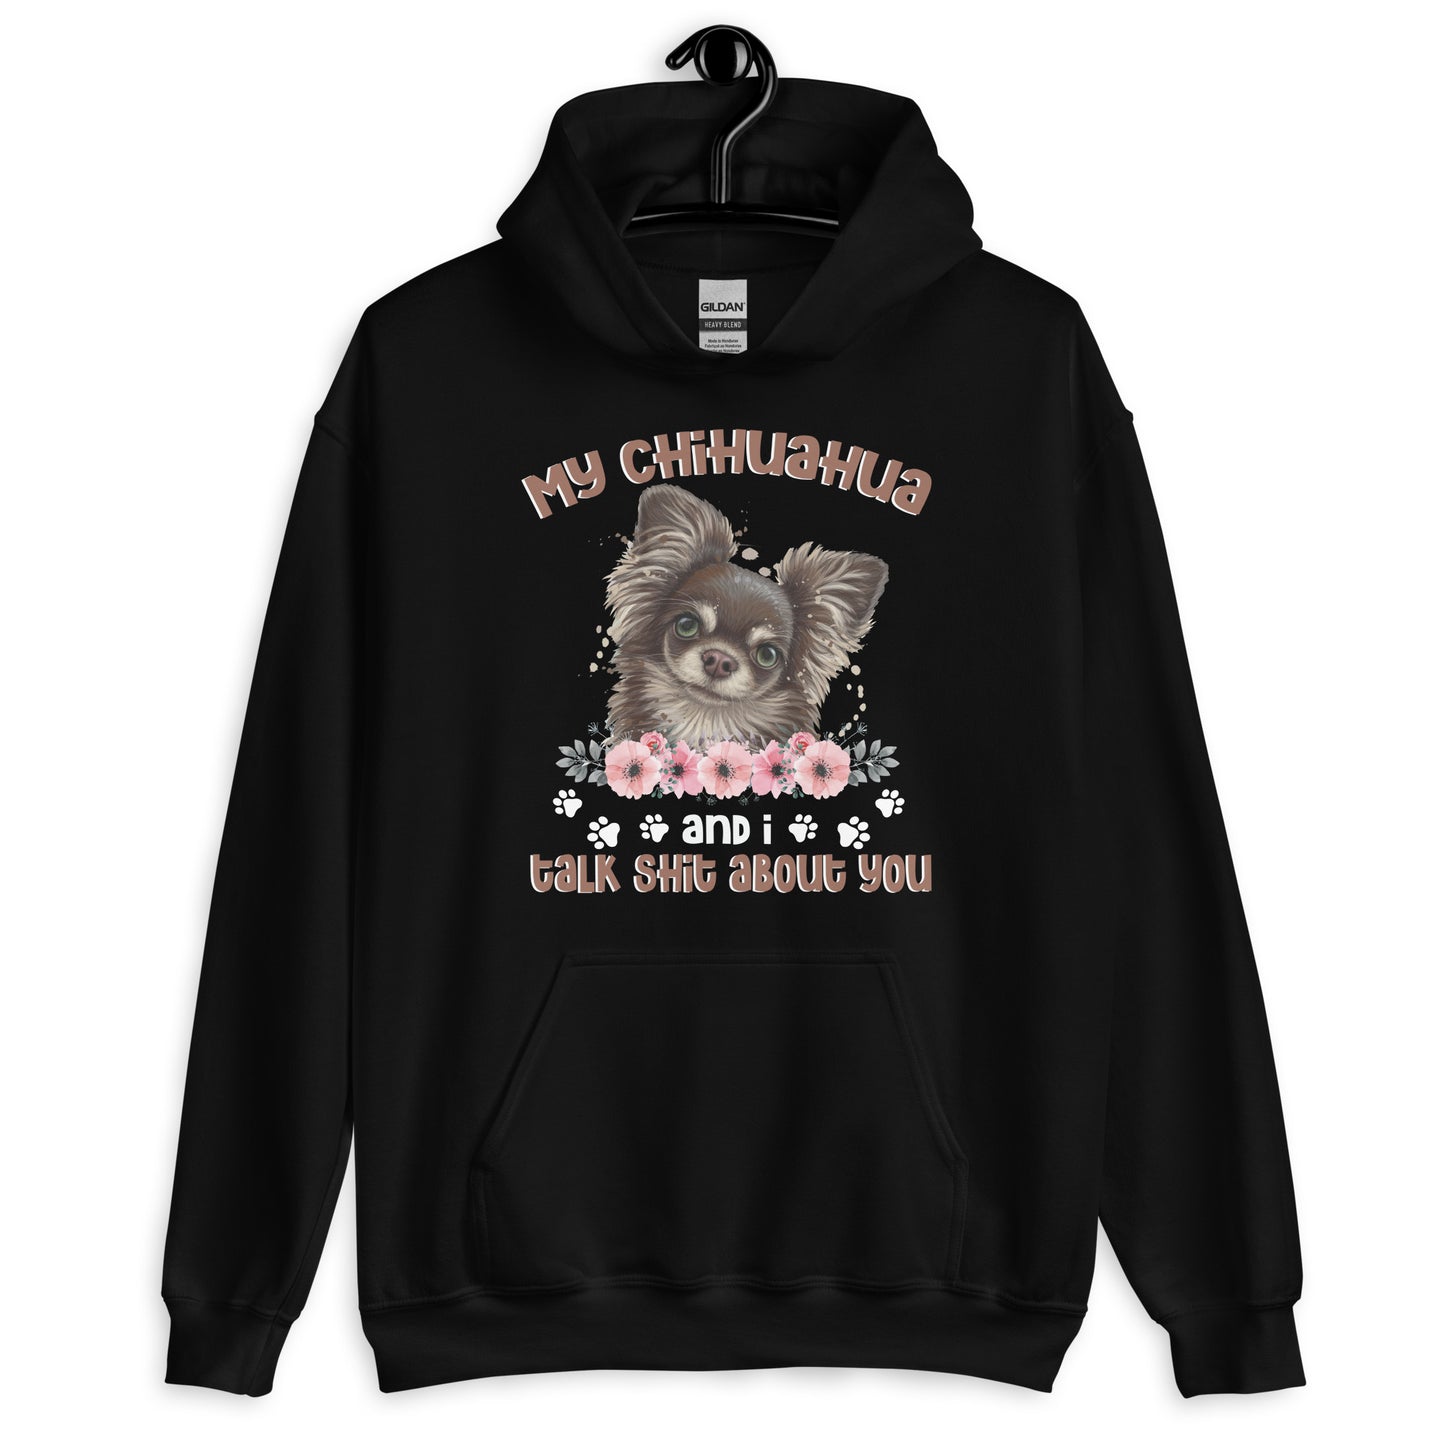 My Chihuahua And I Talk Shit About You Hoodie